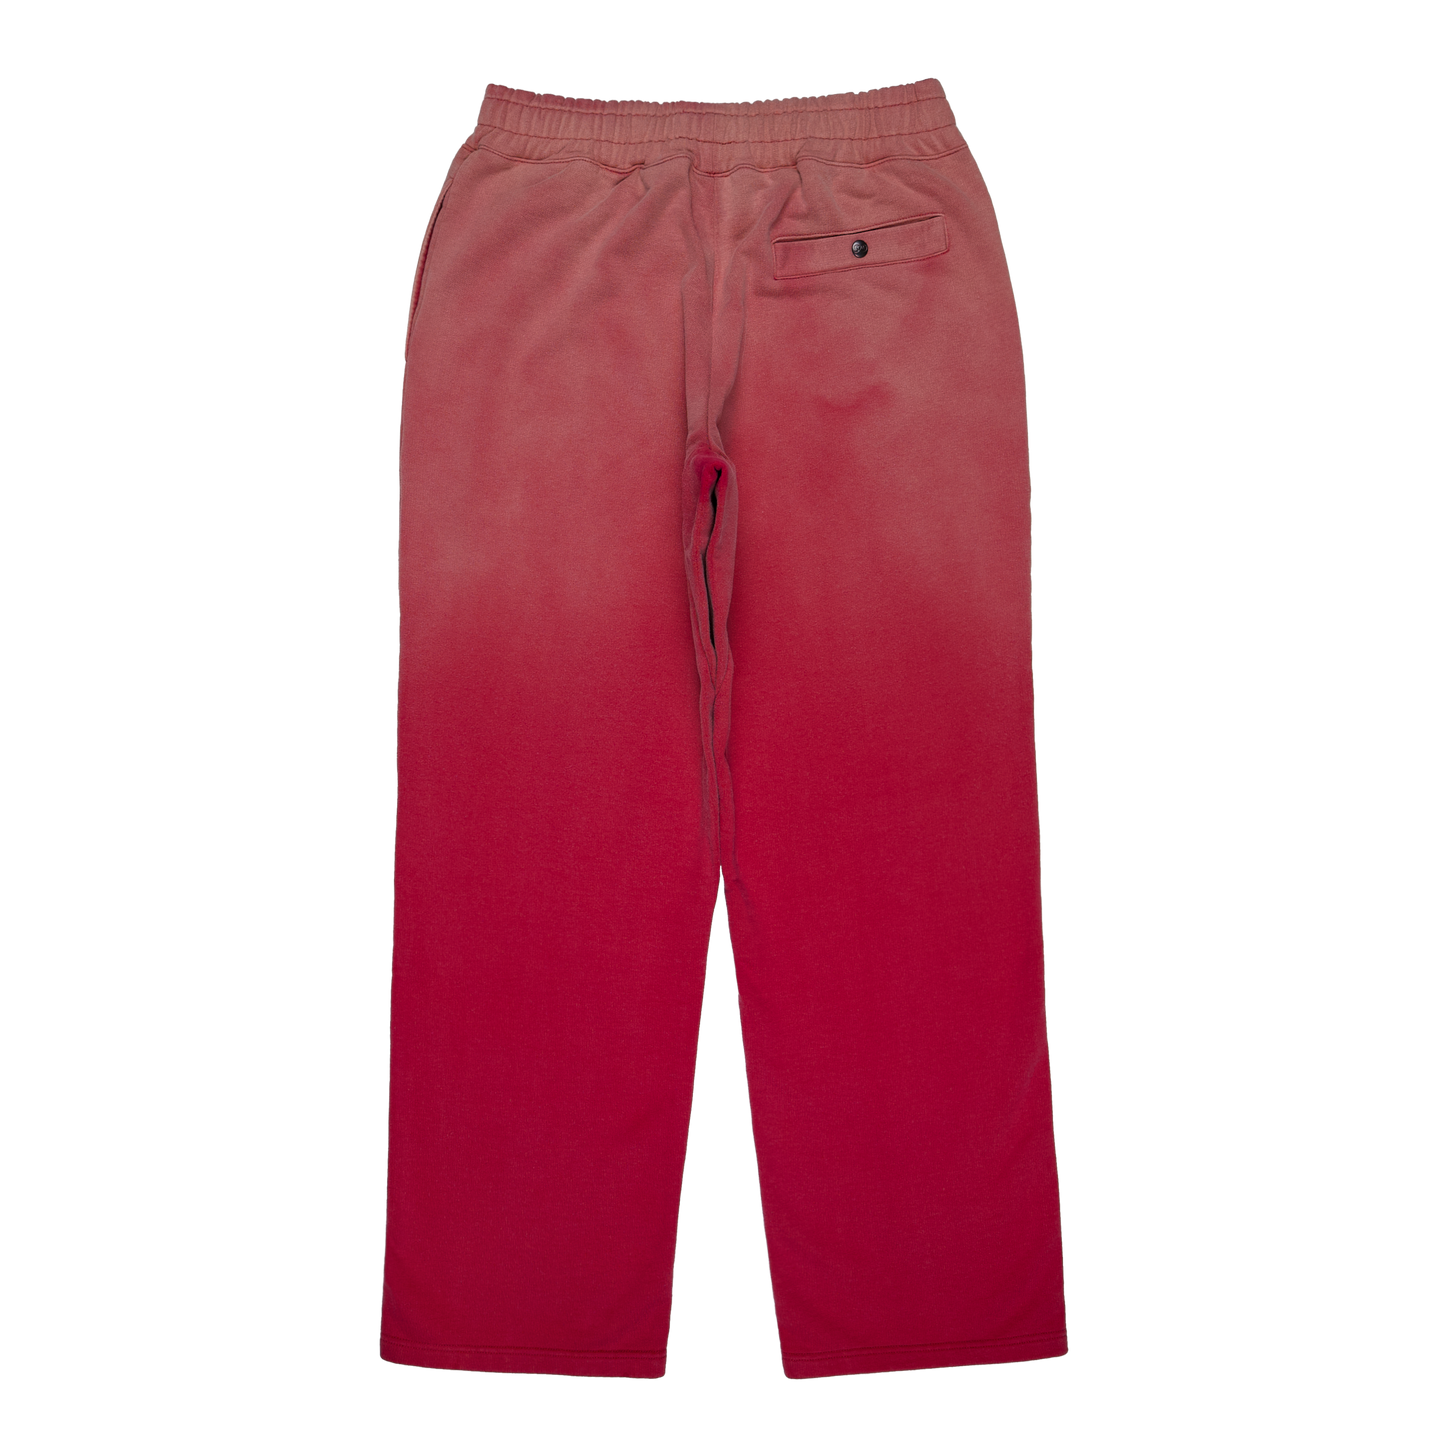 Deconstructed Sweatpants [Faded Red]